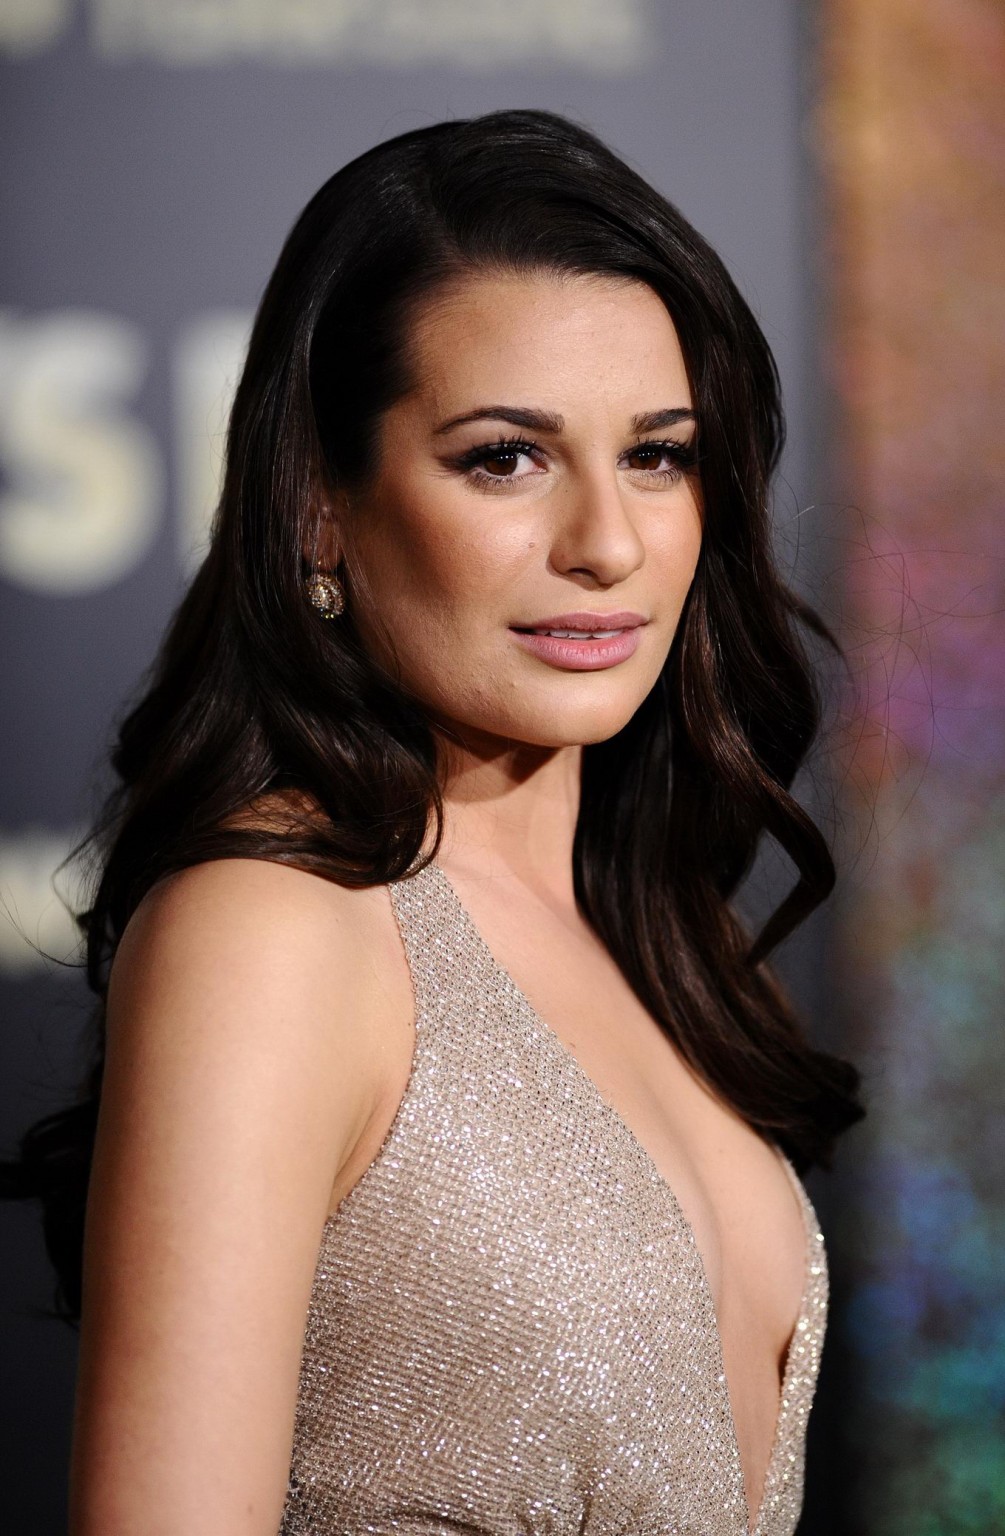 Lea Michele braless showing side boob at the 'New Year's Eve' premiere in LA #75279877